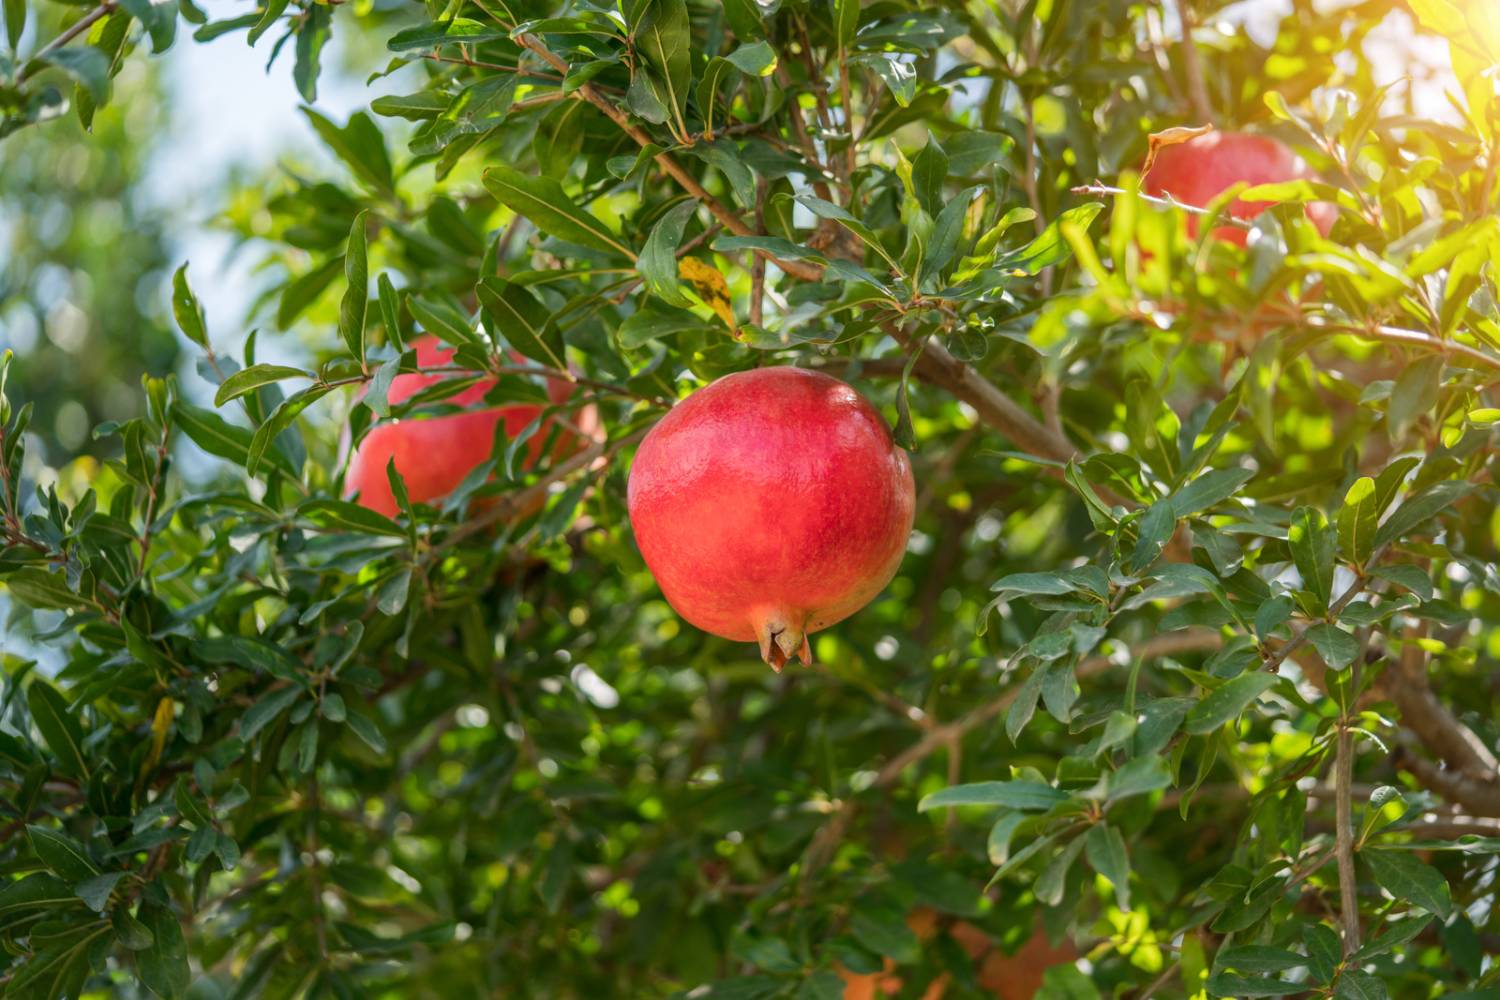 How To Plant A Pomegranate Tree From Seeds